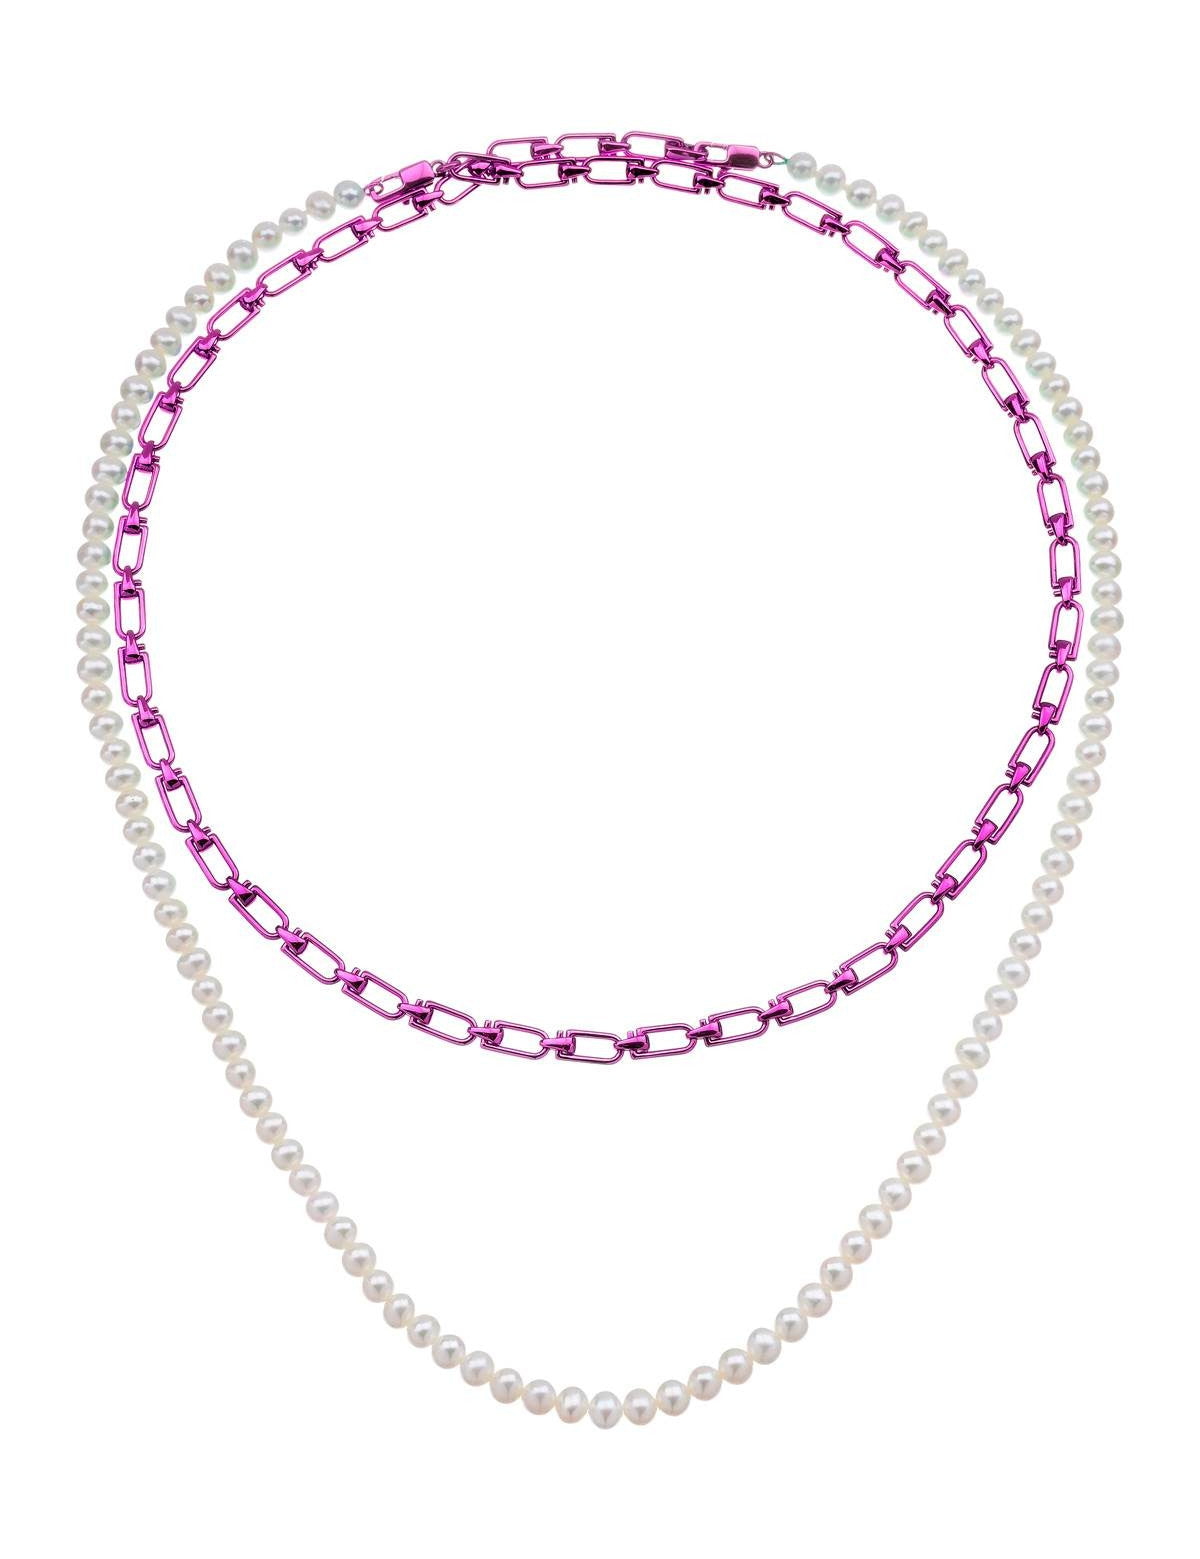 eera-reine-double-necklace-with-pearls_e07ddbc3-c16e-4bd5-aae6-13ff92528294.jpg